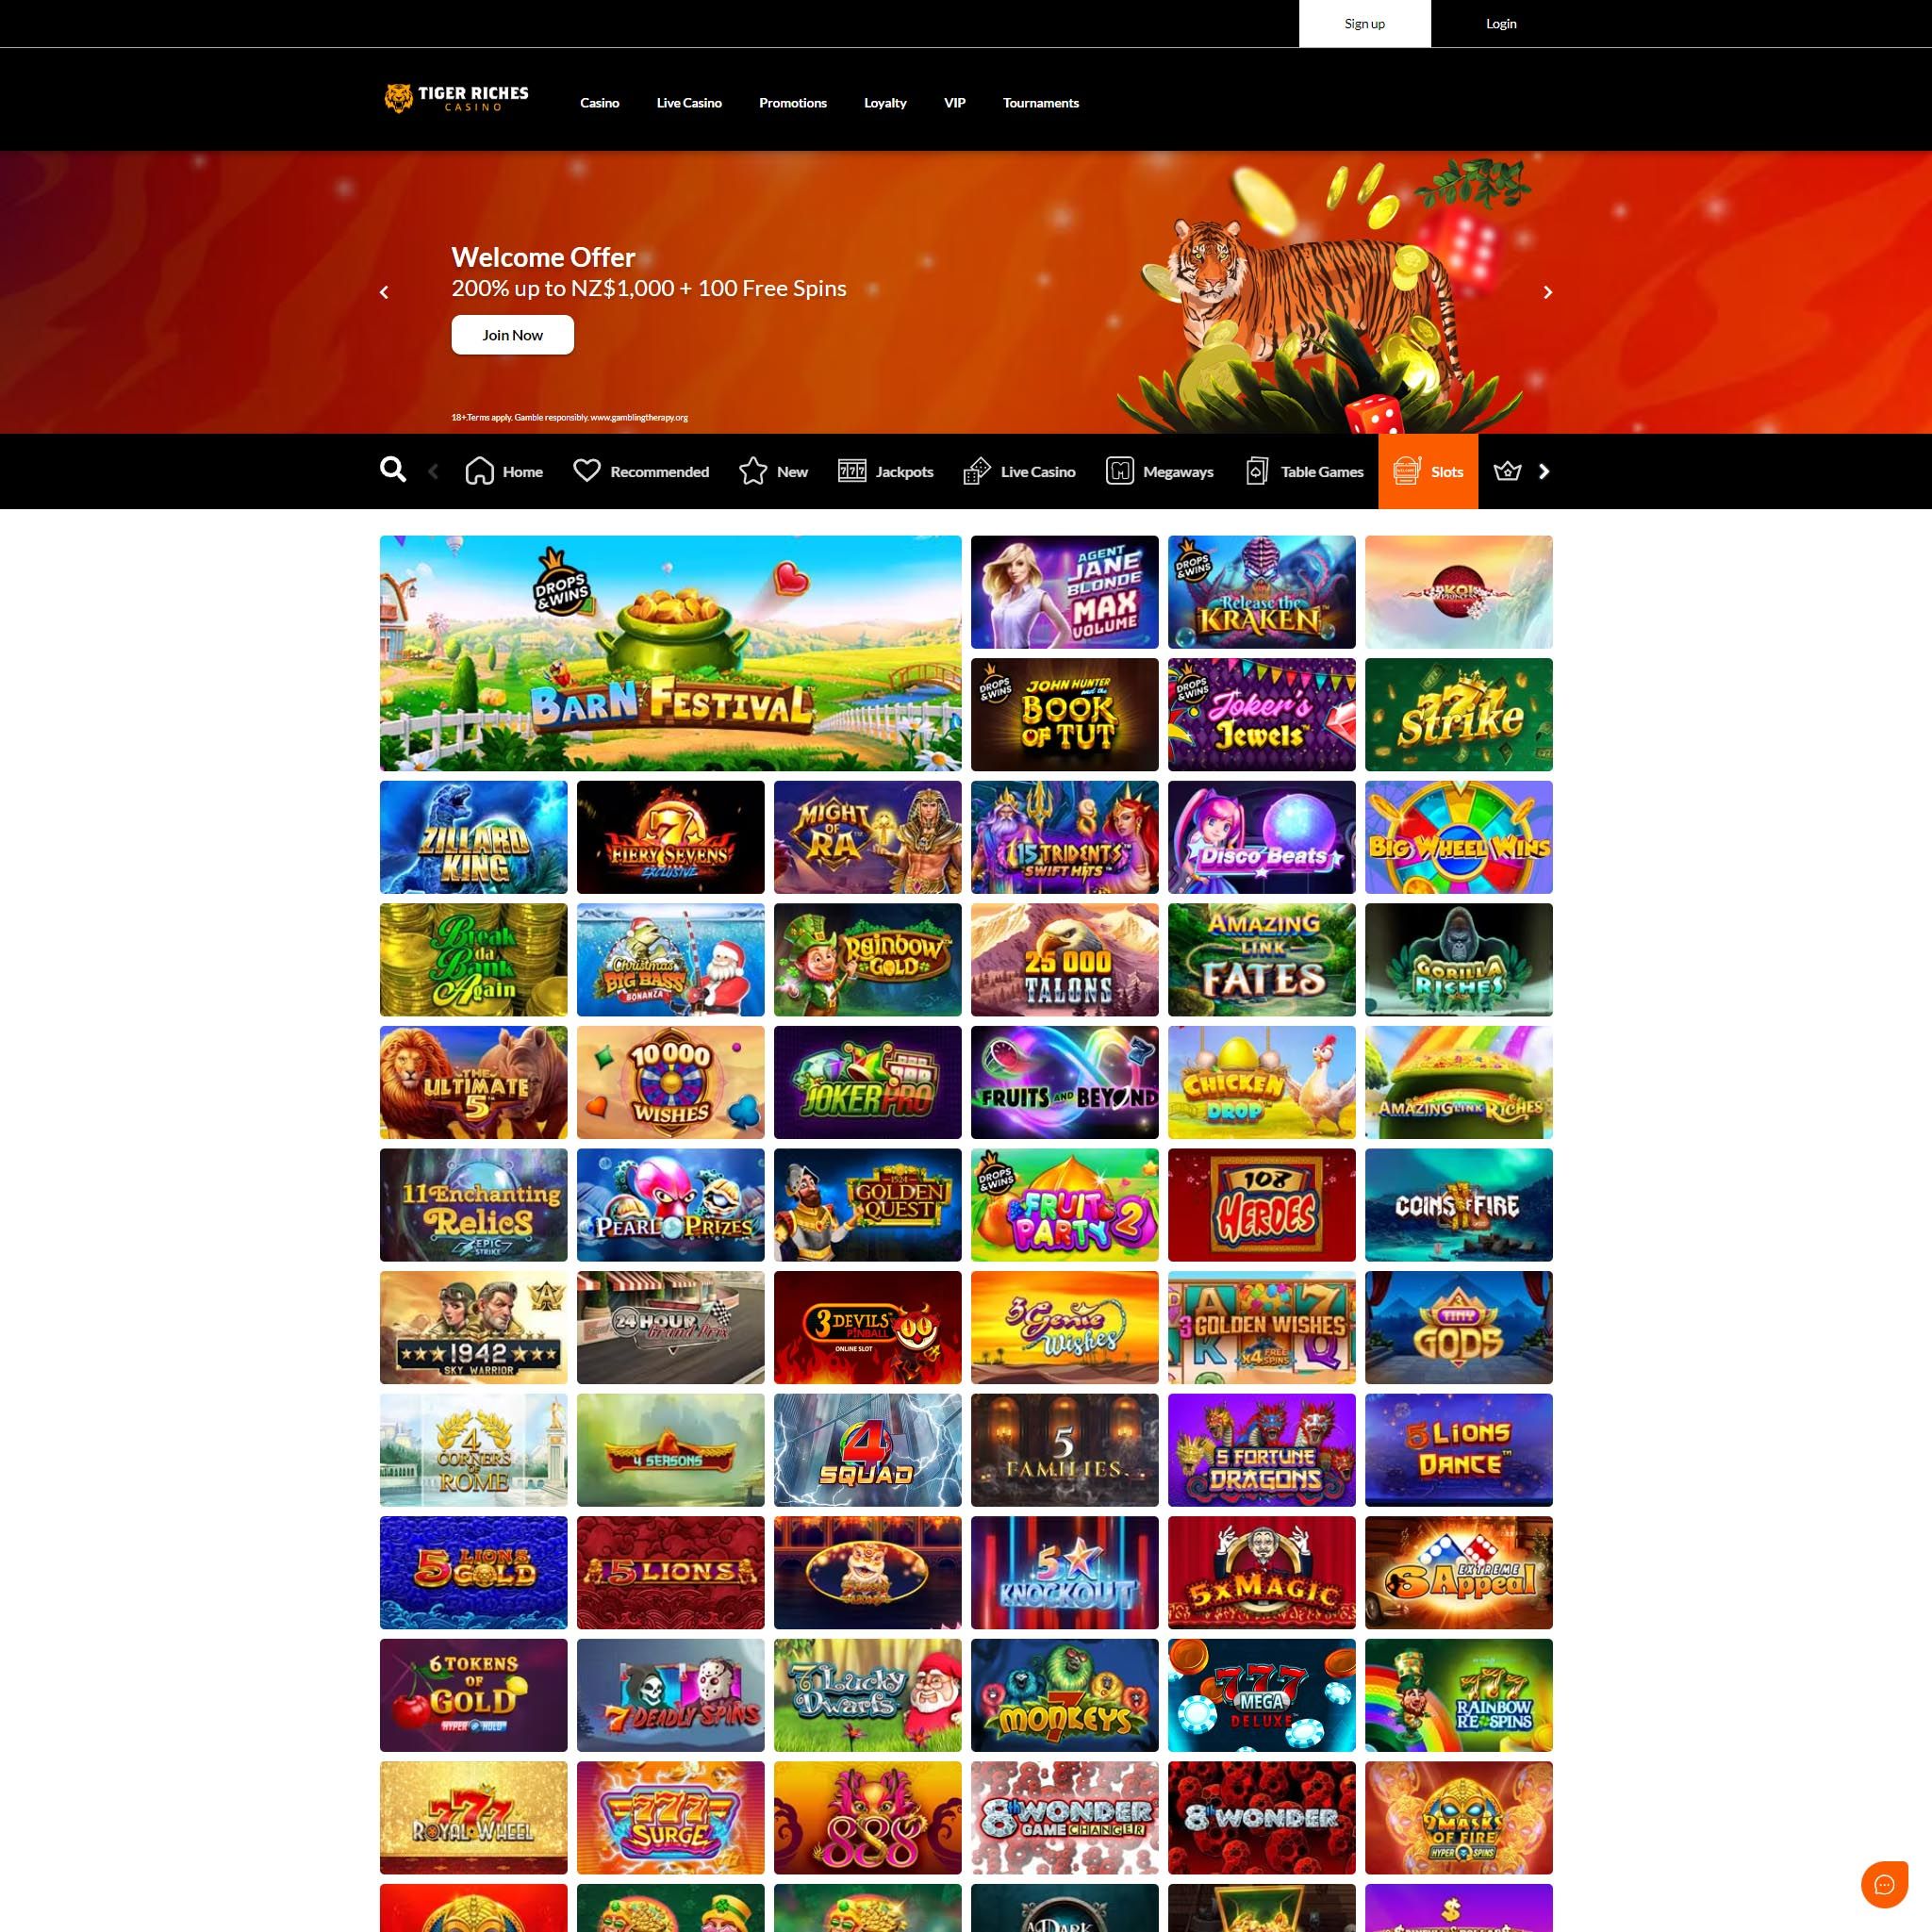 Tiger Riches casino full games catalogue